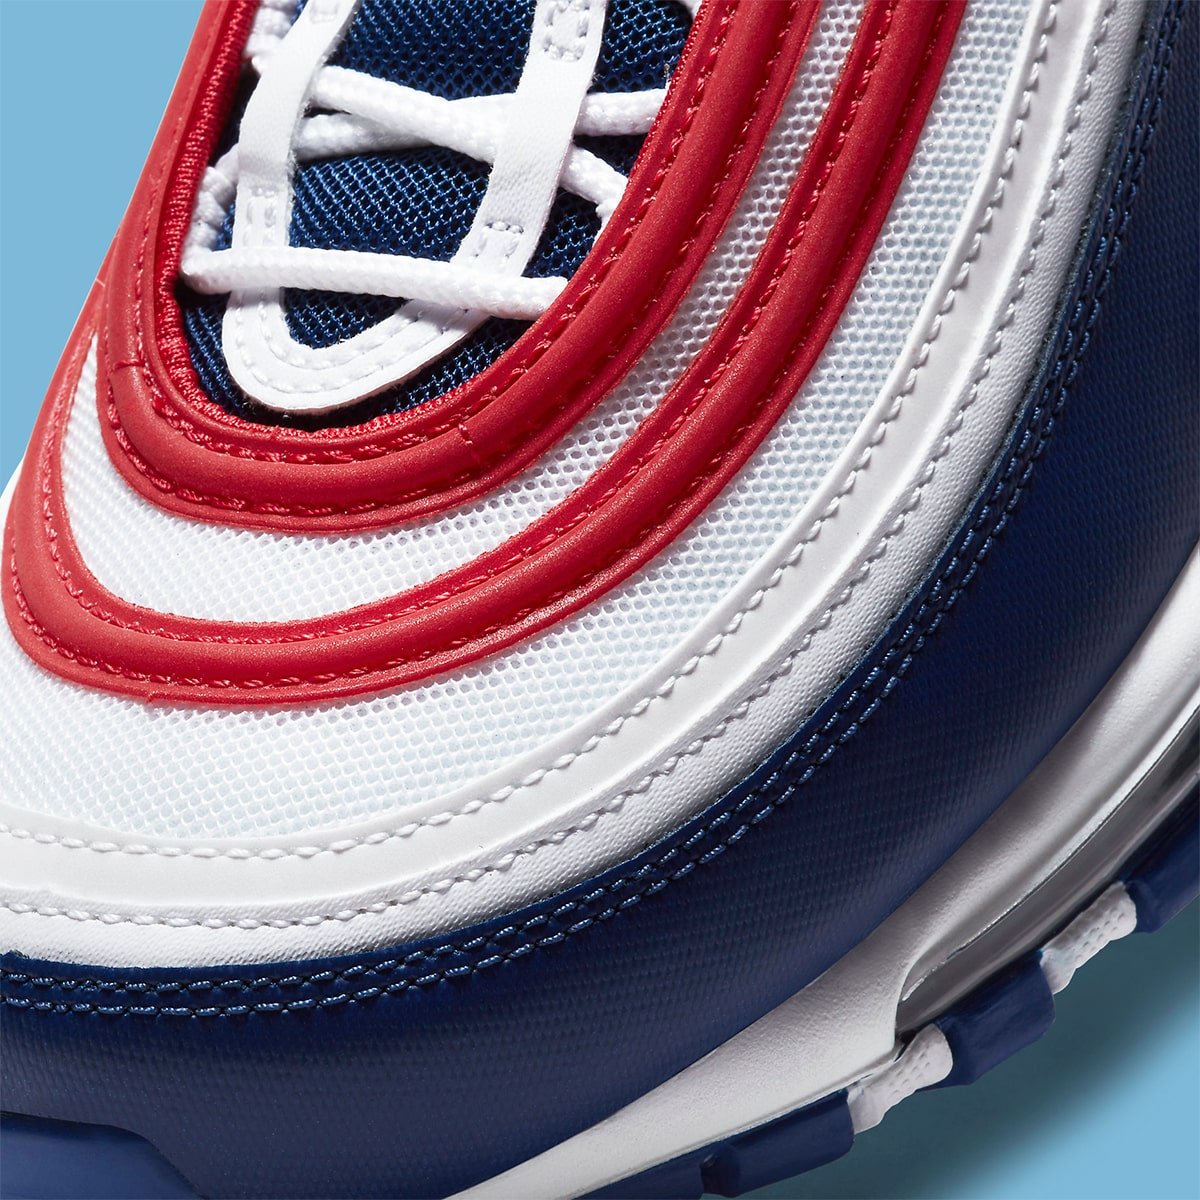 nike-air-max-97-white-navy-red-cw5584-100-release-date-info-7